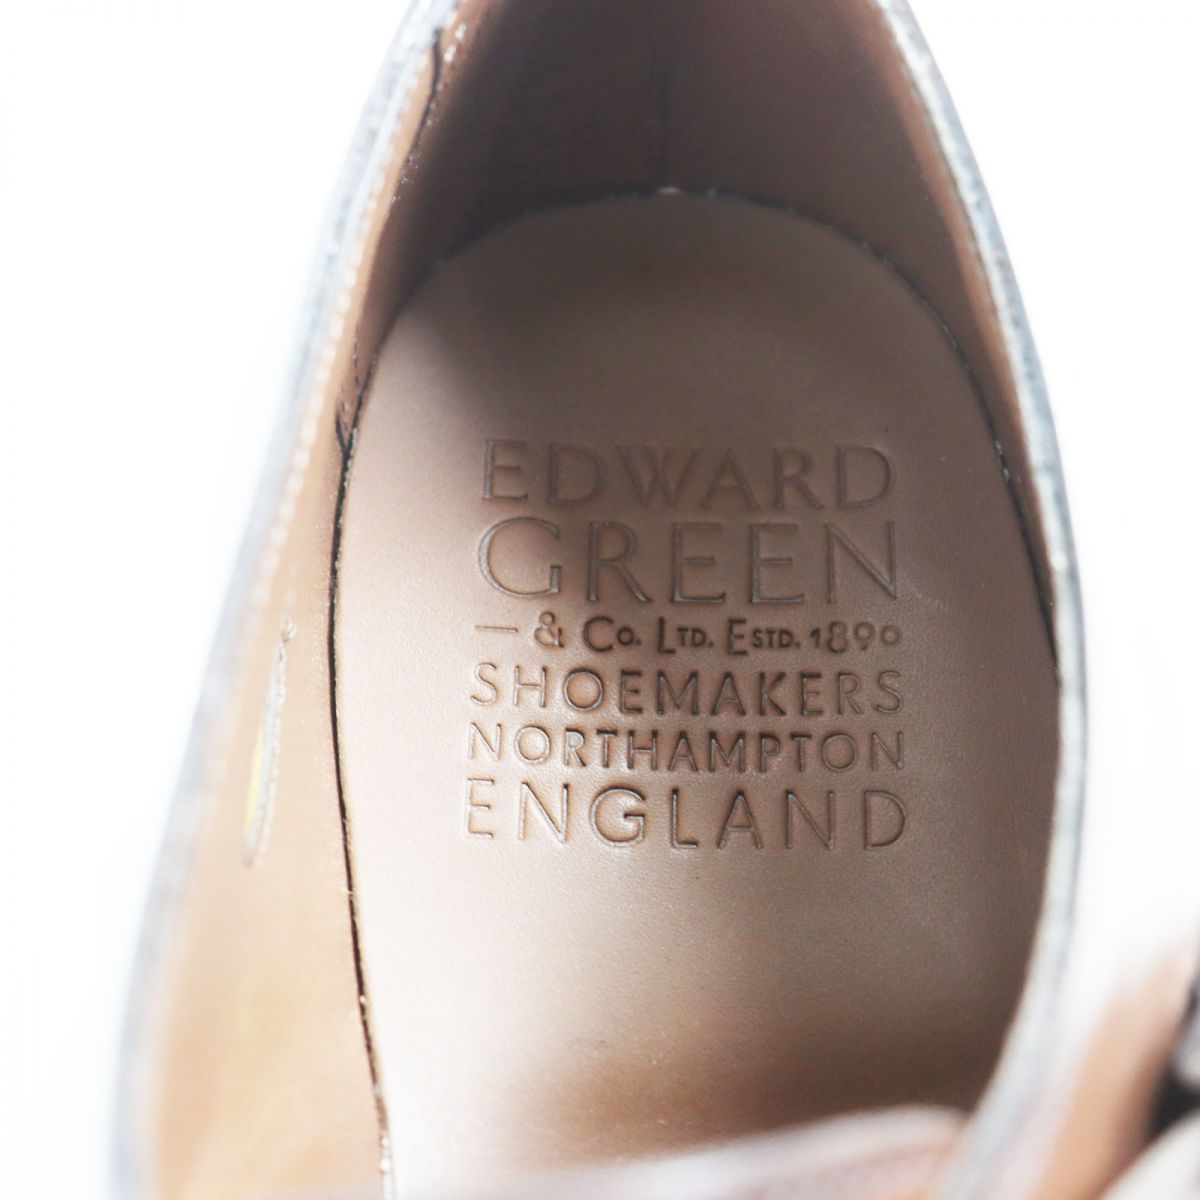  unused * Edward Green WESTMINSTER 808 last strut chip double monk strap leather shoes dark brown 6 box attaching 